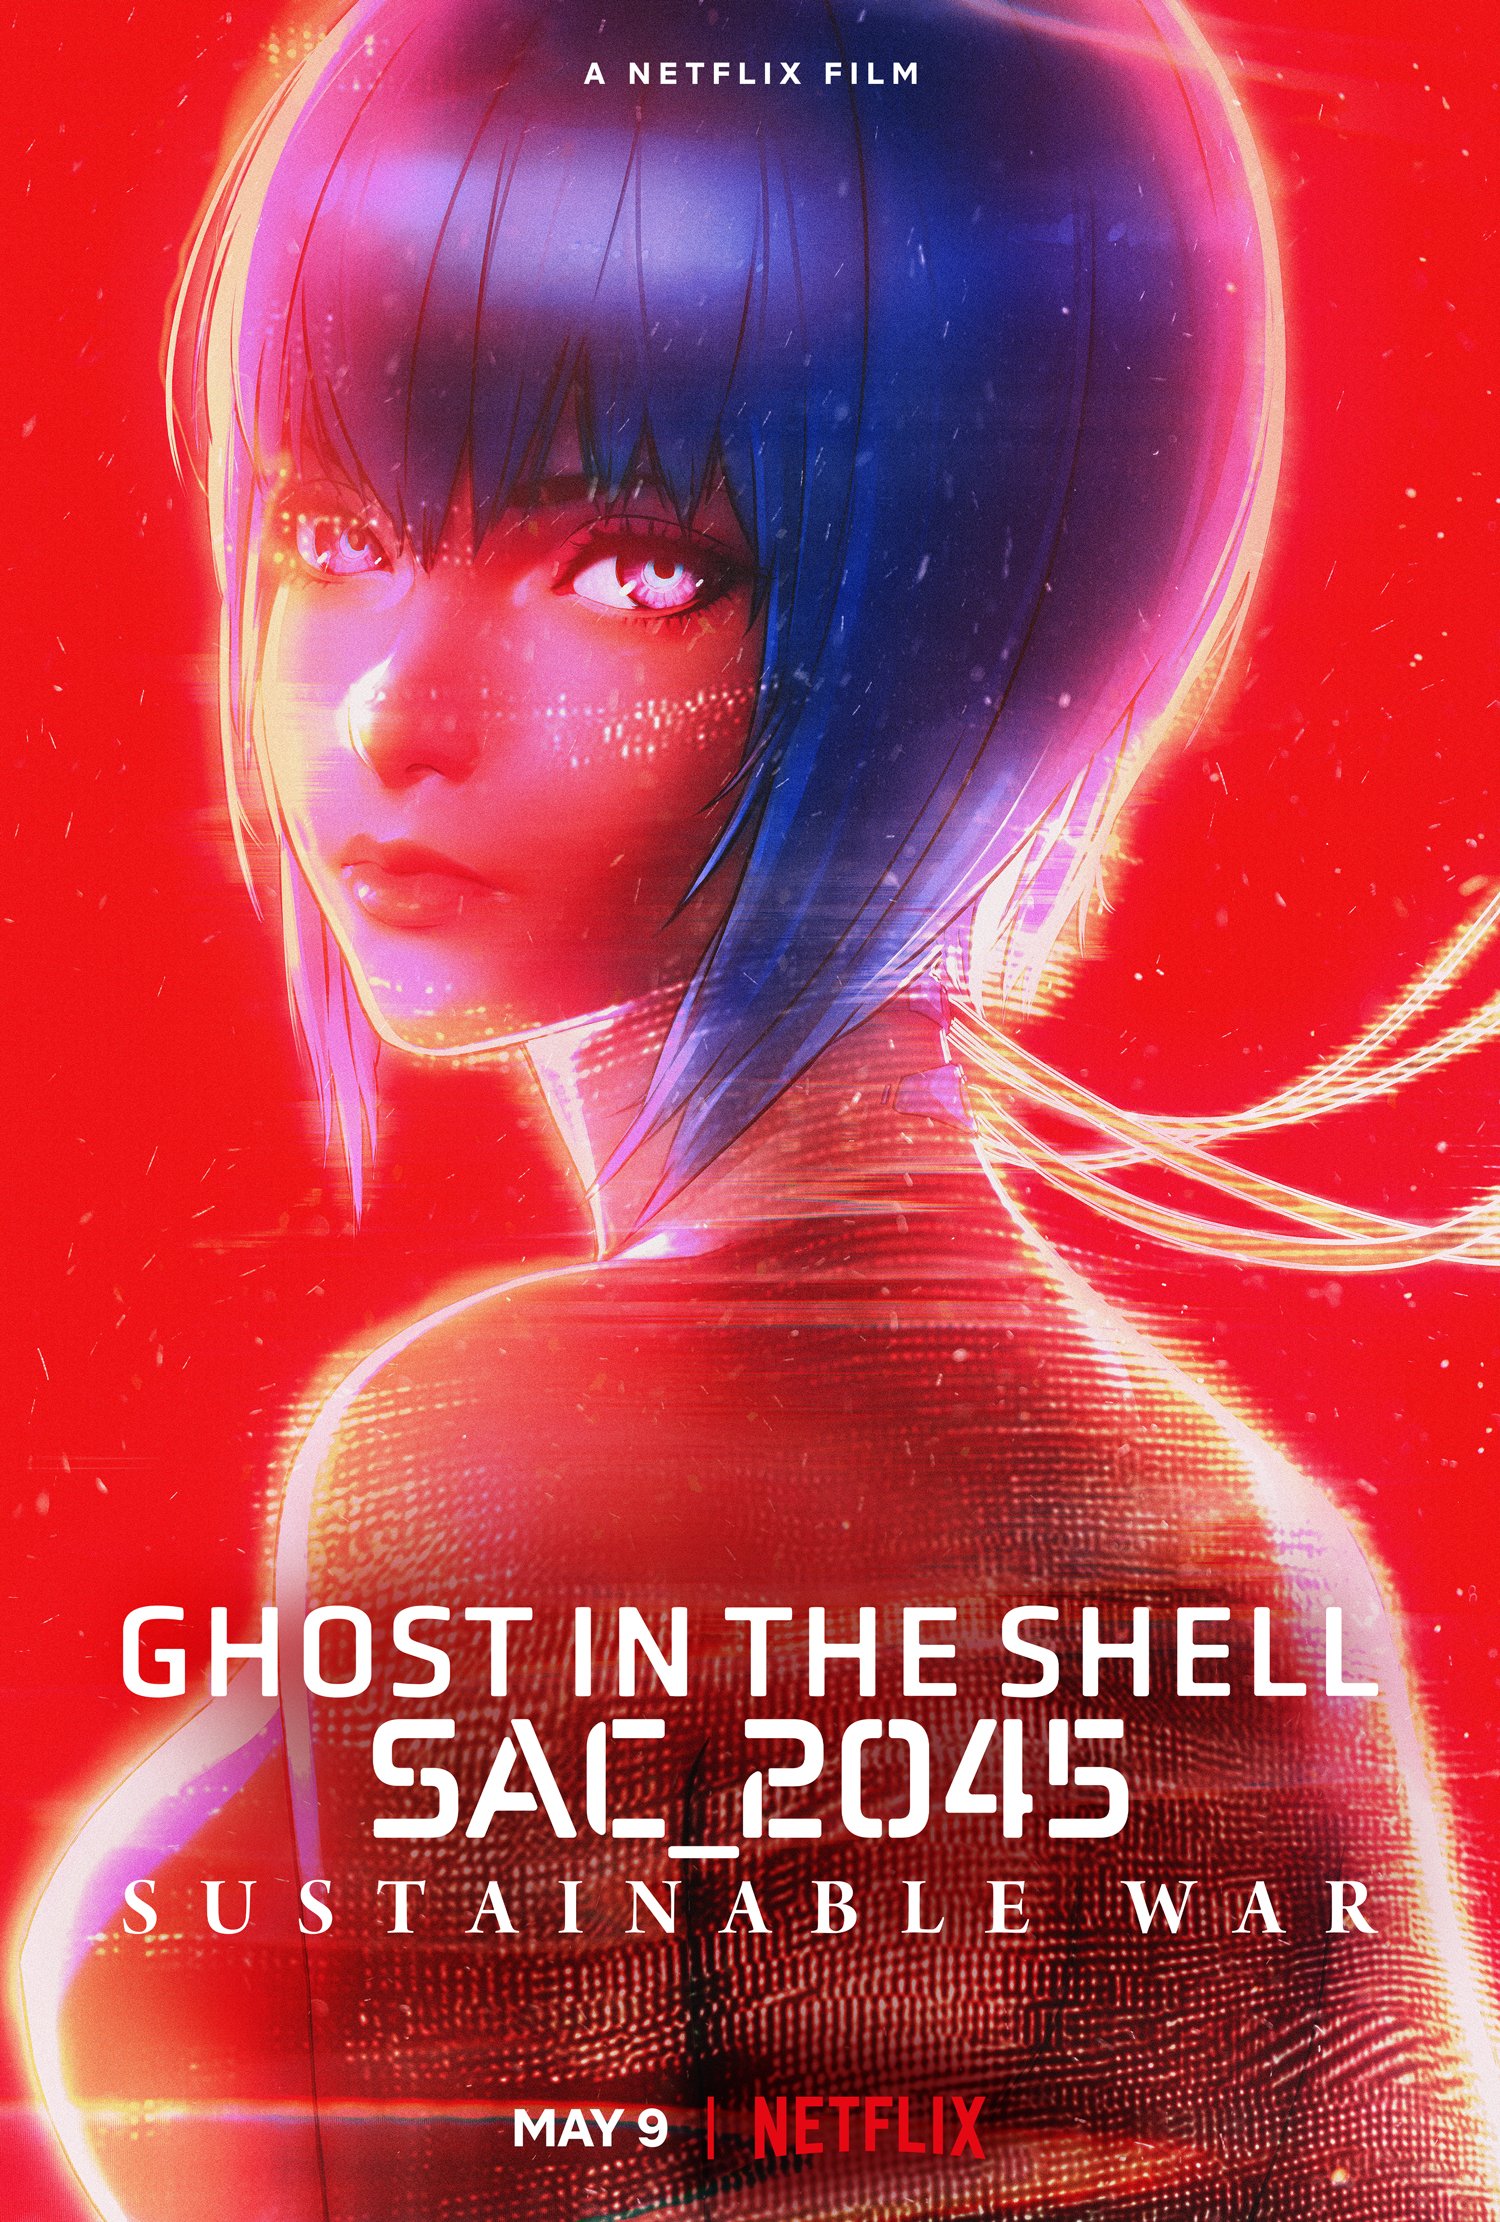 Ghost in the Shell: SAC_2045 Sustainable War visual